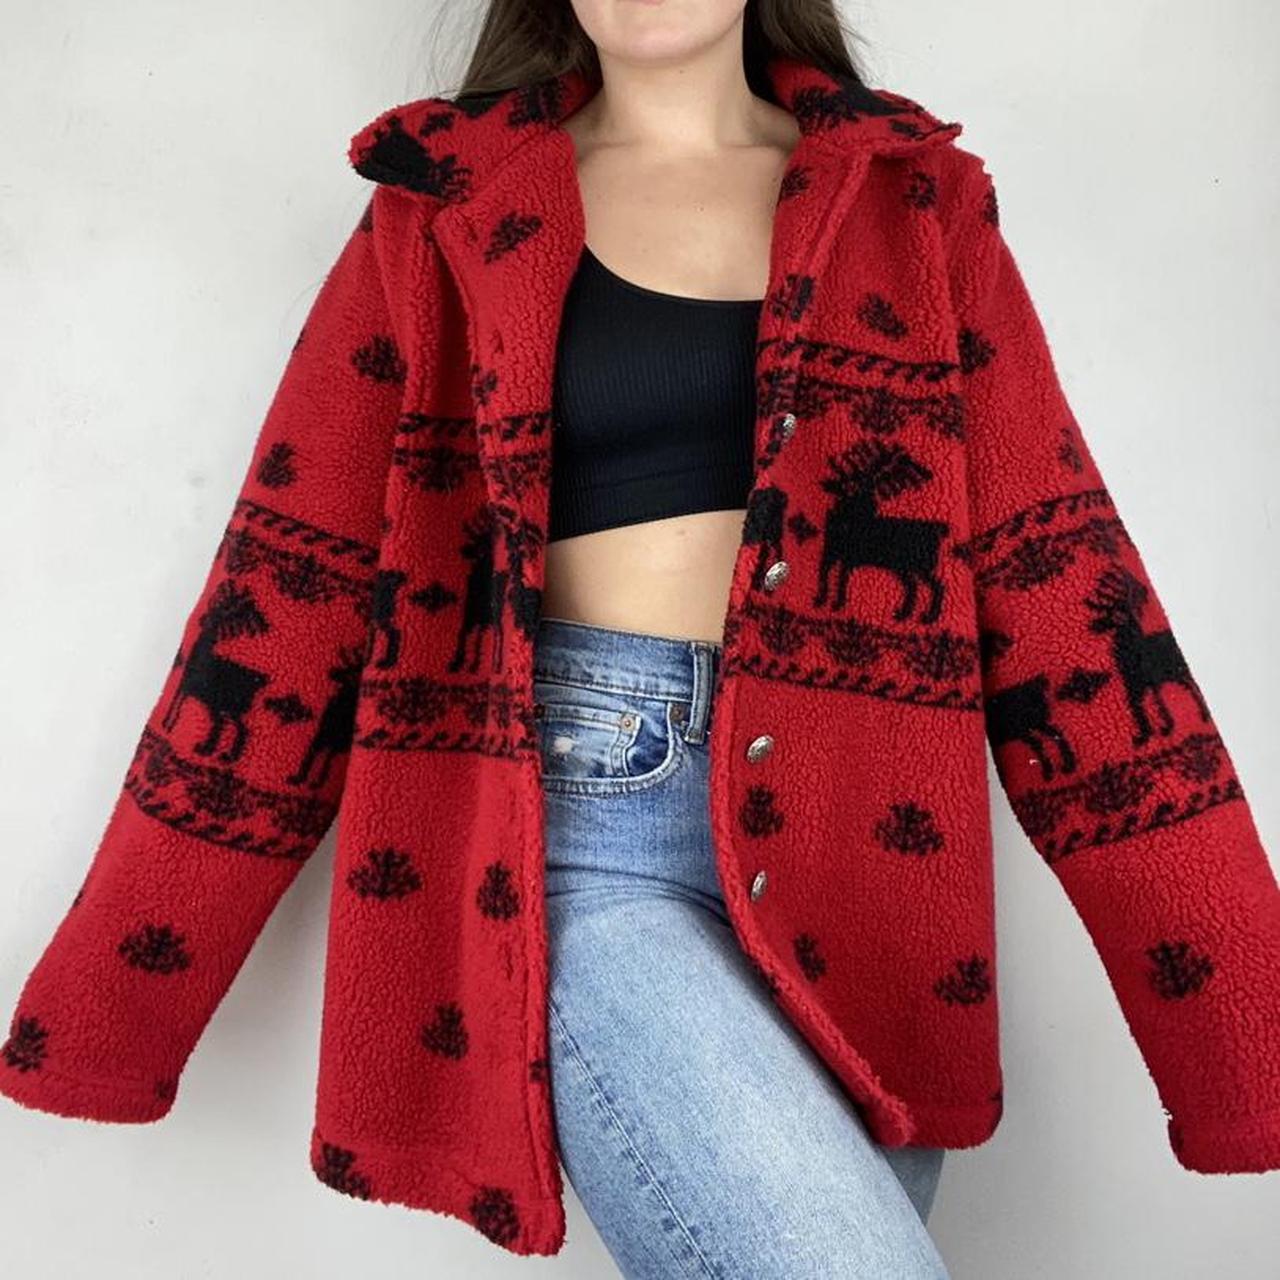 Product Image 1 - Vintage Oversized Teddy Coat❤️‍🔥
This adorable